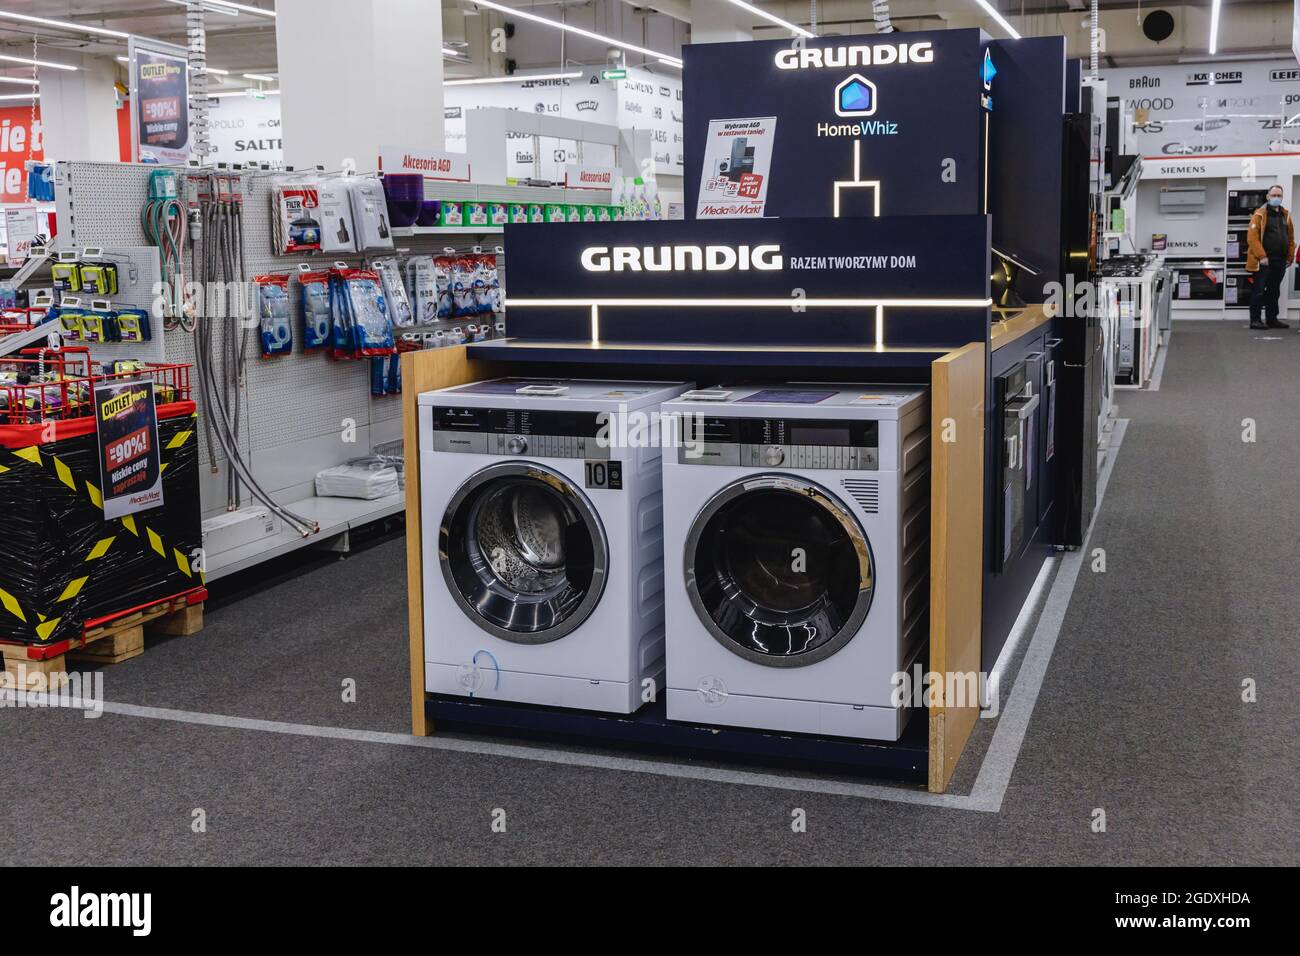 Grundig washing machines in MediaMarkt store with household appliances and consumer electronics in Warsaw, Poland Stock Photo